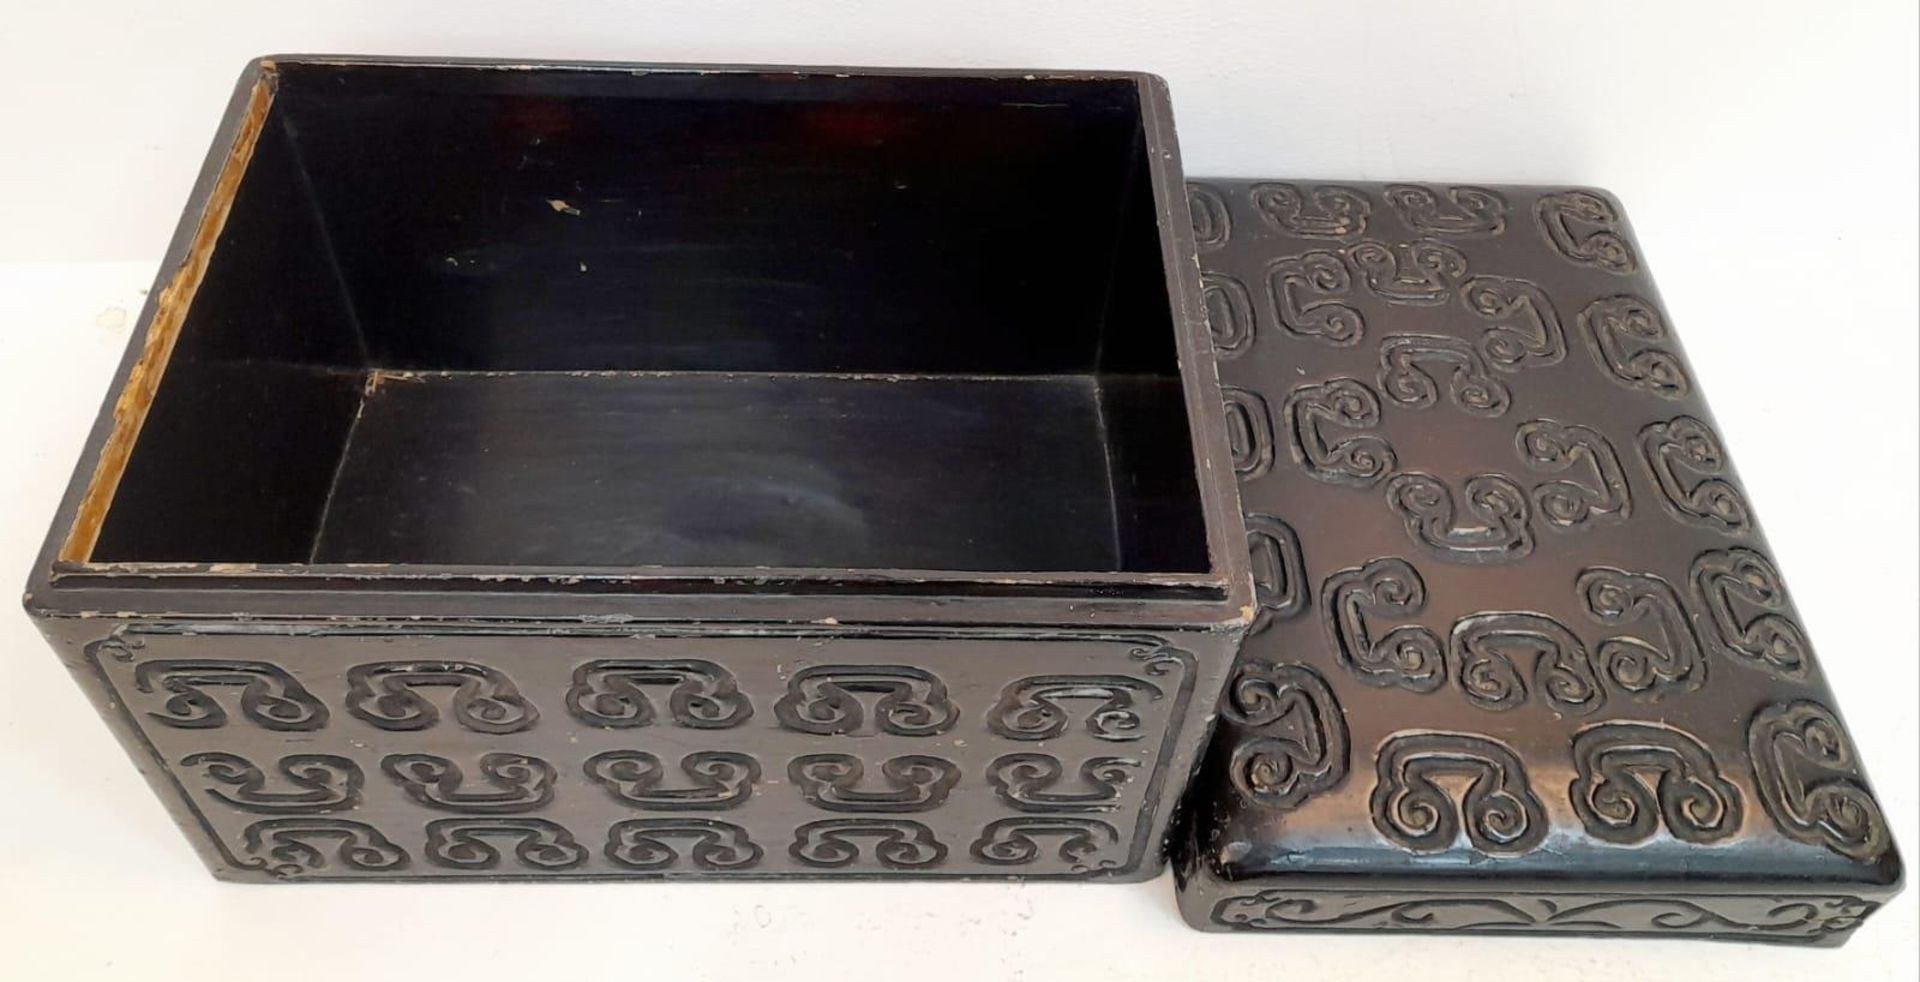 A Fascinating and Wonderful Antique Chinese Large Lacquered Box - 18th century, possibly earlier. - Image 5 of 7